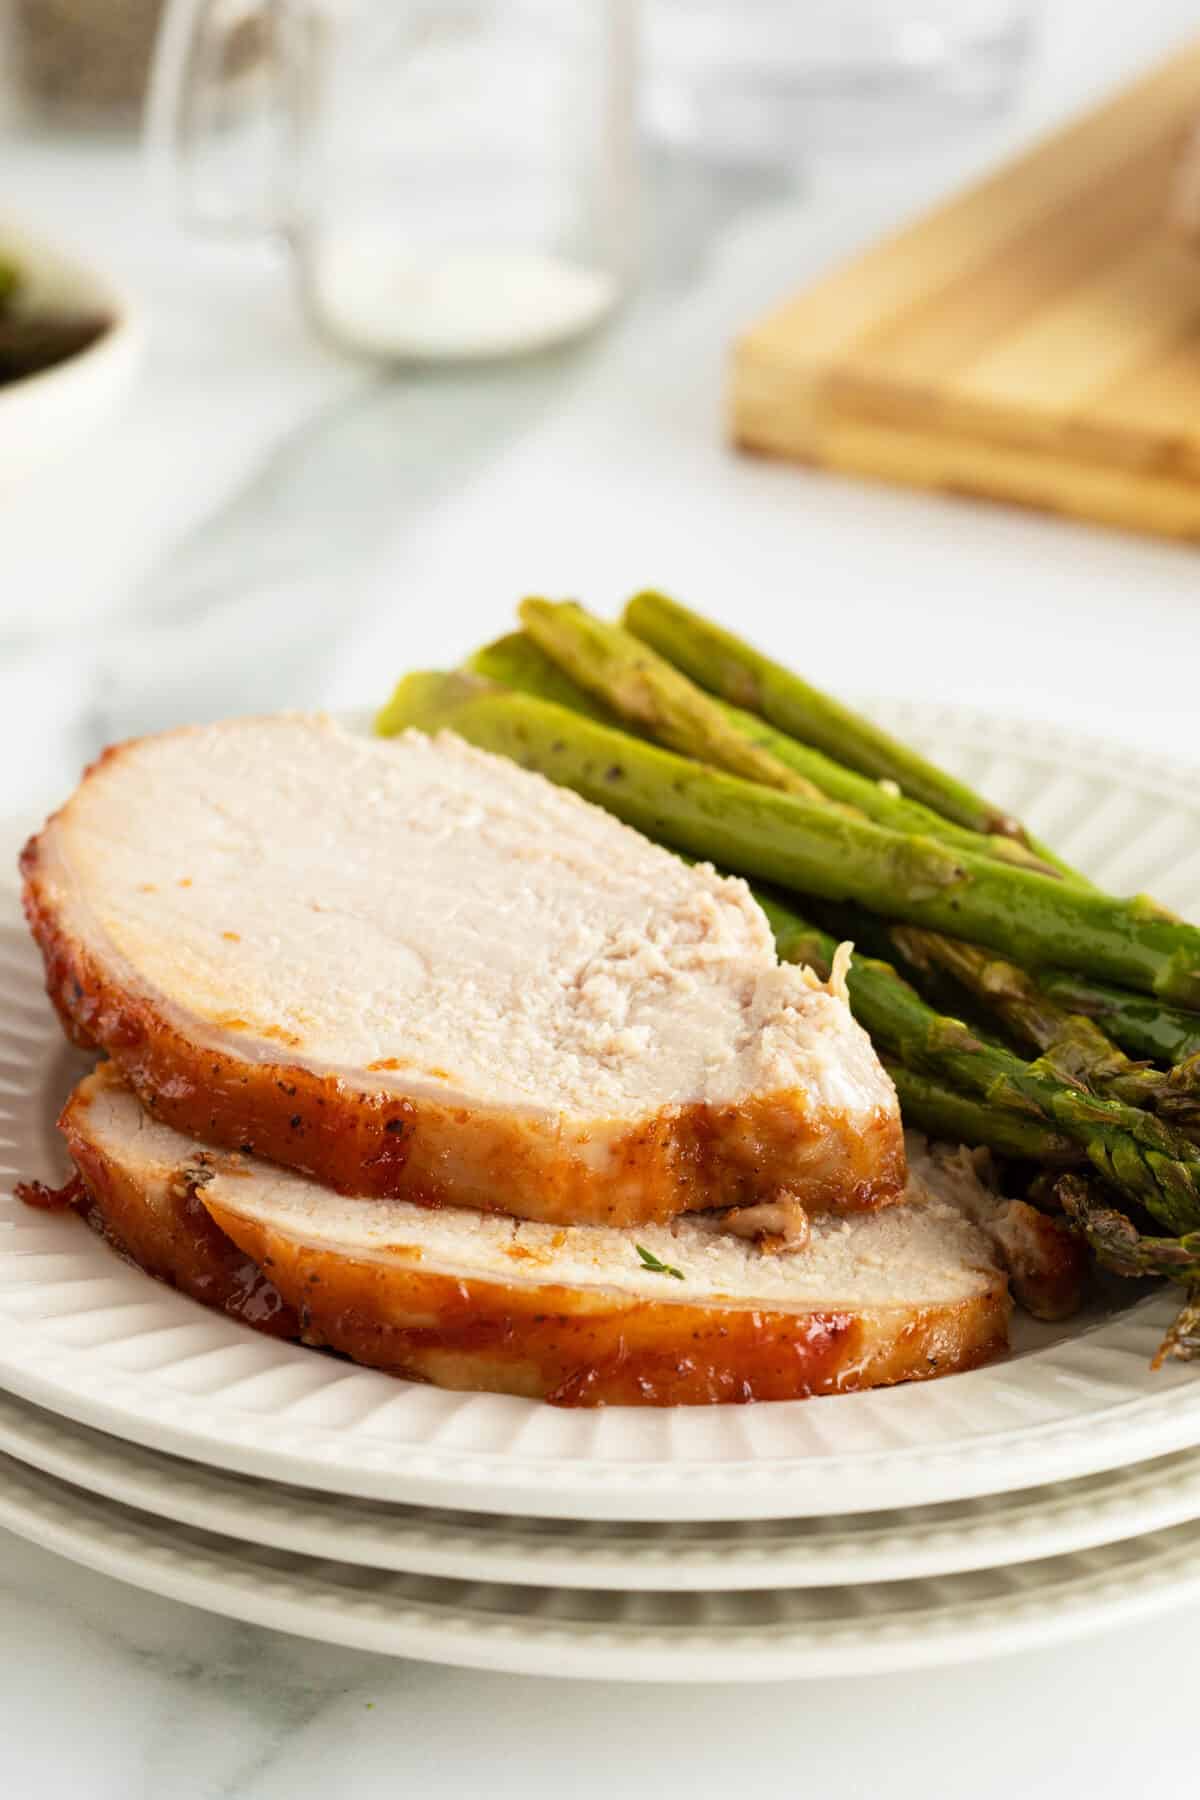 Grilled pork loin slices on a white plate with asparagus on the side